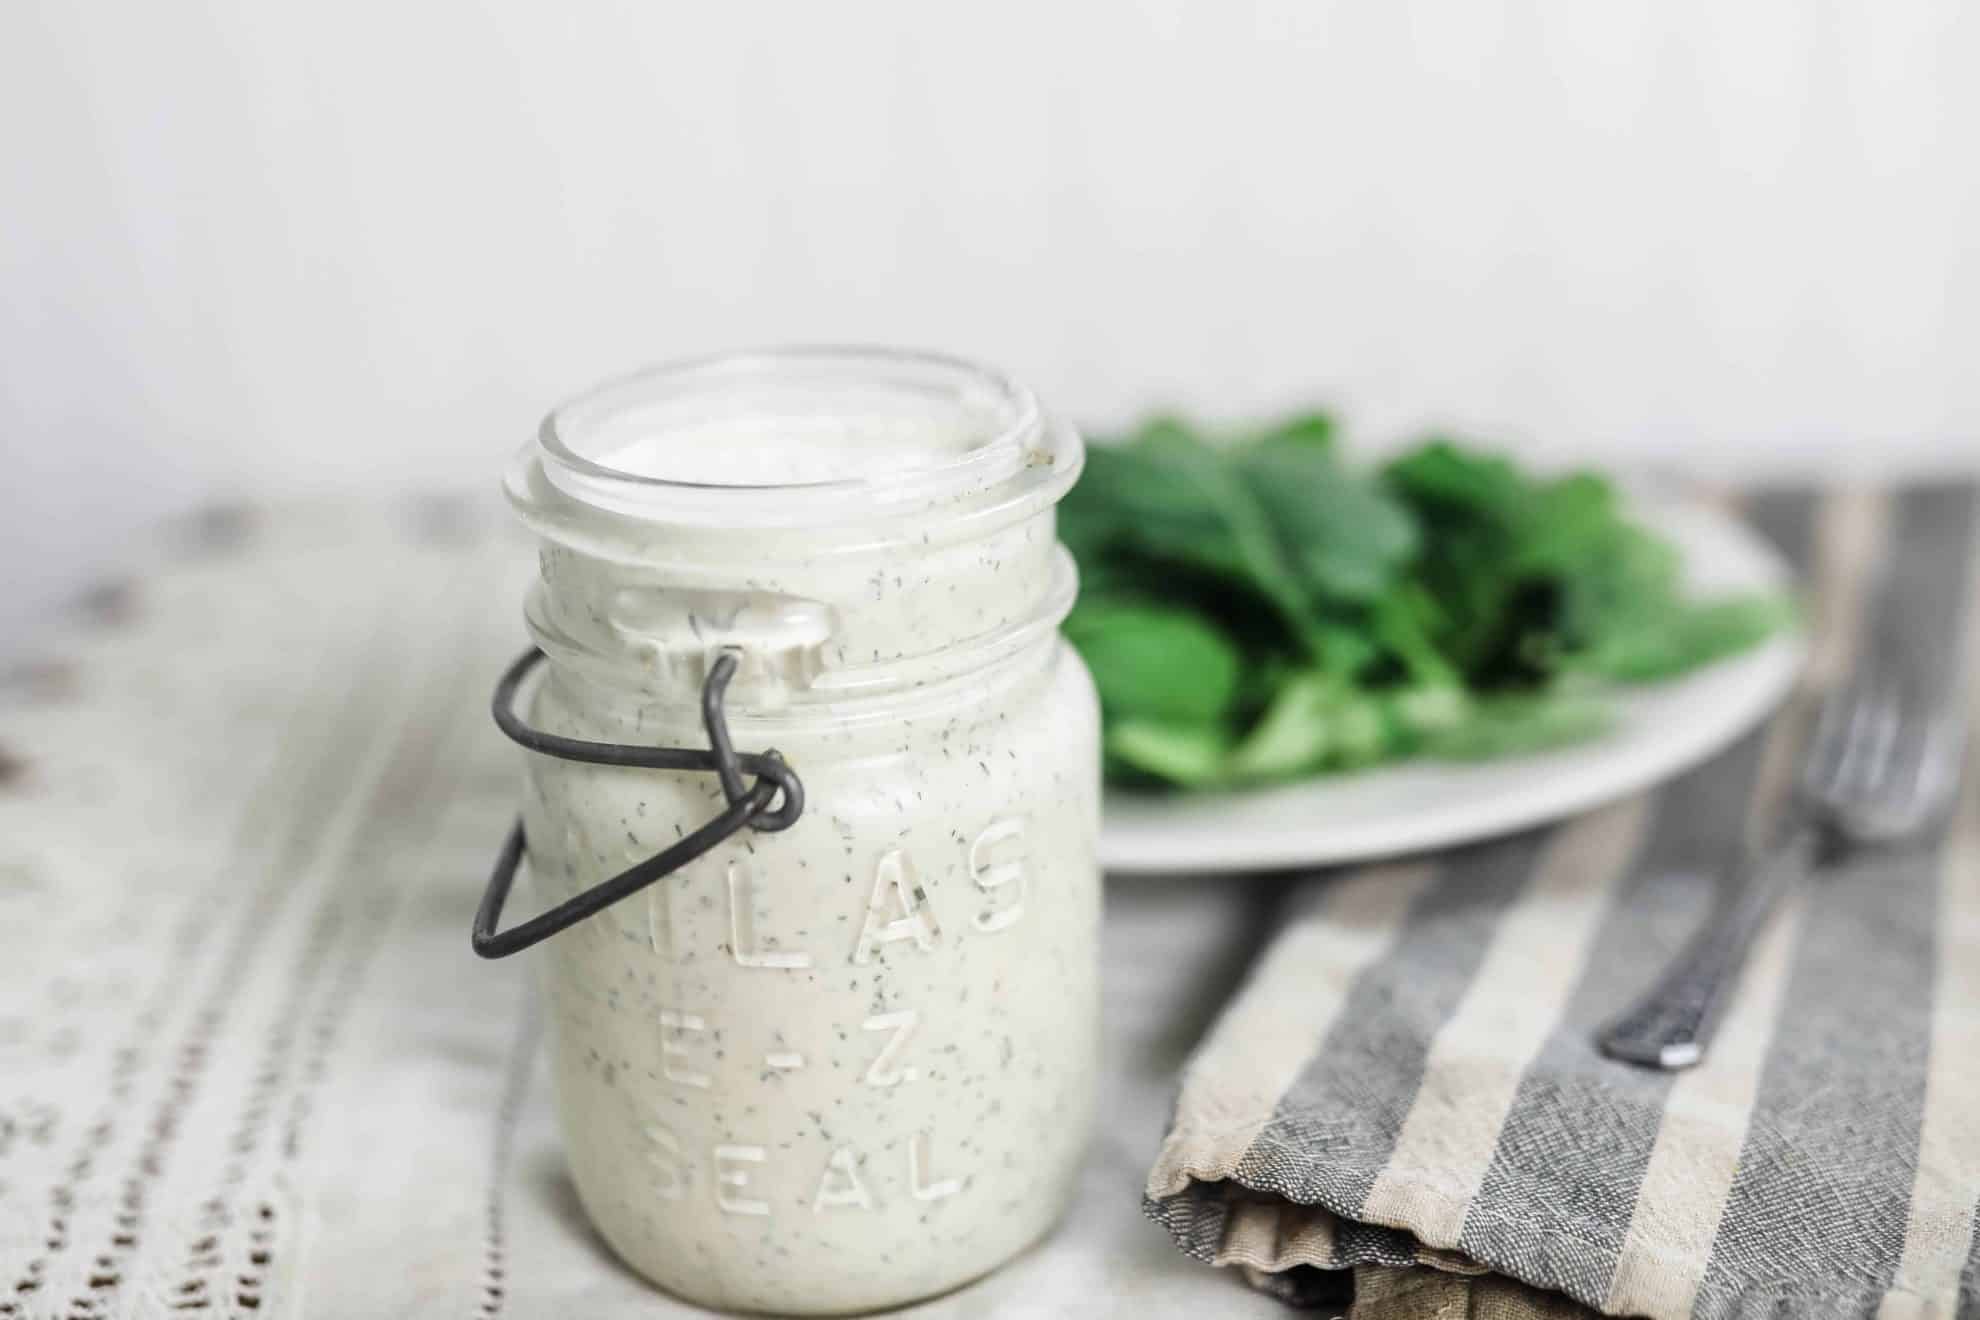 kefir ranch dressing in a vintage mason jar on a striped tea towel with a plate of salad behind it